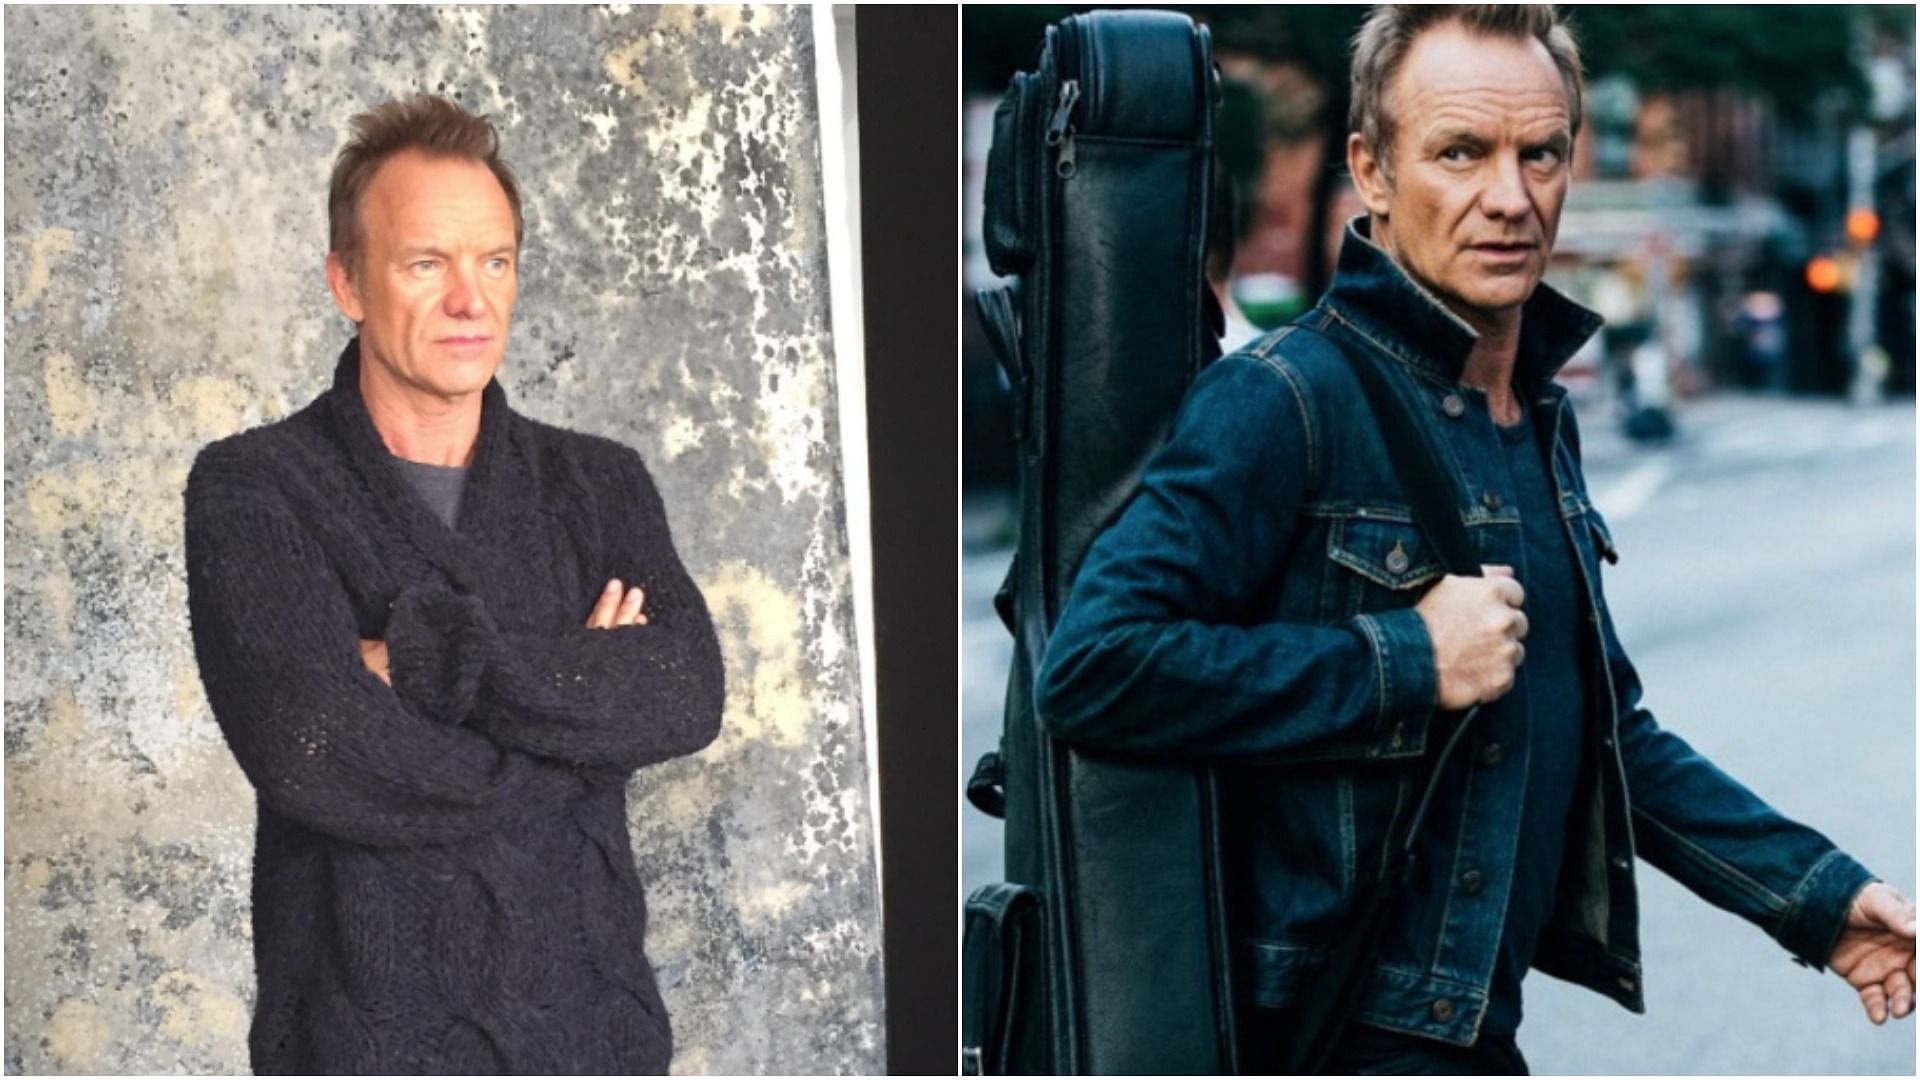 Sting credits his fitness to pilates and consistent diet routine and pilates exercises. (Image via IG @theofficialsting)